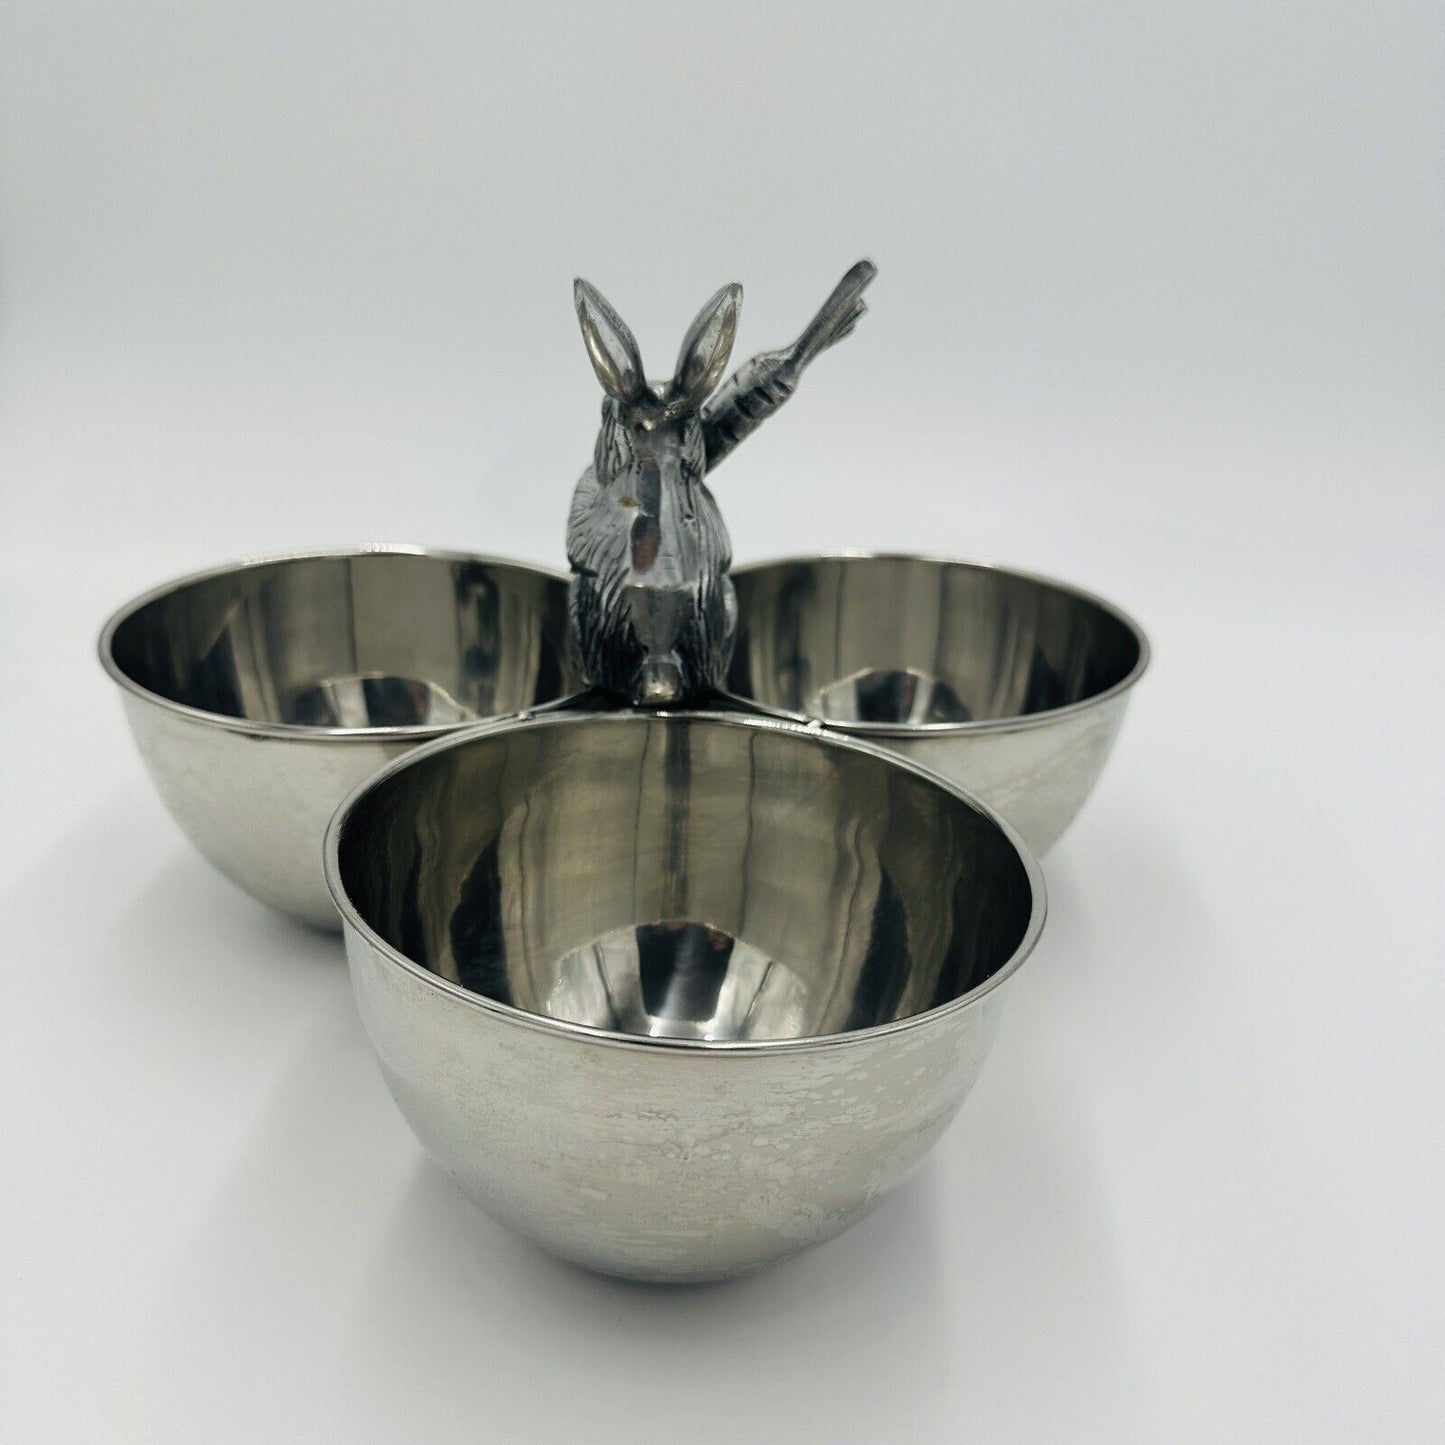 Nicole Miller Silver Easter Nut Bowls Candy Dish Platter Bunny Rabbit